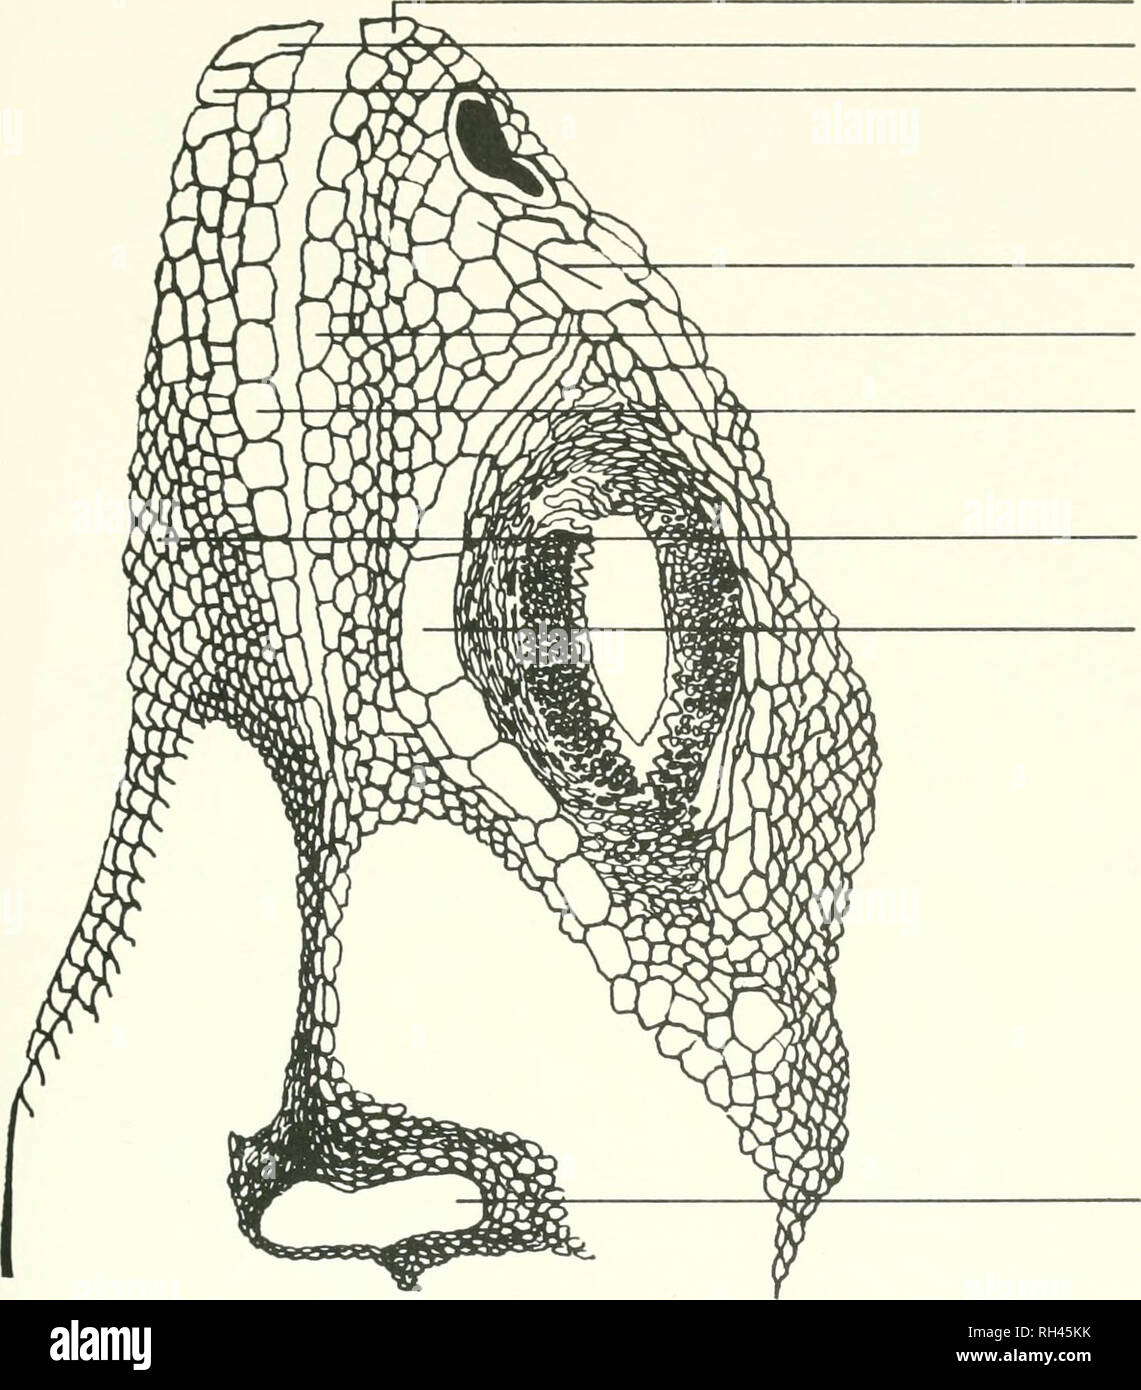 . Brigham Young University science bulletin. Biology -- Periodicals. BIOLOGICAL SERIES. VOL. 1 3, NO. 2 CROTAPHYTUS COLLARIS. ROSTRAL MENTAL POSTMENTAL CANTHALS SUPRALABIALS INFRALABIALS GULARS SUBOCULARS EAR Fig. 2. A lateral view of head scalation typical for the population.-; studied. (Drawn from BYU 21705) X-^(l-a.9) = 80.768 X (0.999,9) =29.7 U-statistic (Anderson, 1958). The U-statistic was determined to be U,^^ :, -75. = 0.0209. Since most U-statistic tables only go up to p=10, Paul Sampson's Table 1. A contingency table testing the indepen- dence of Ward's clustering method and the pr Stock Photo